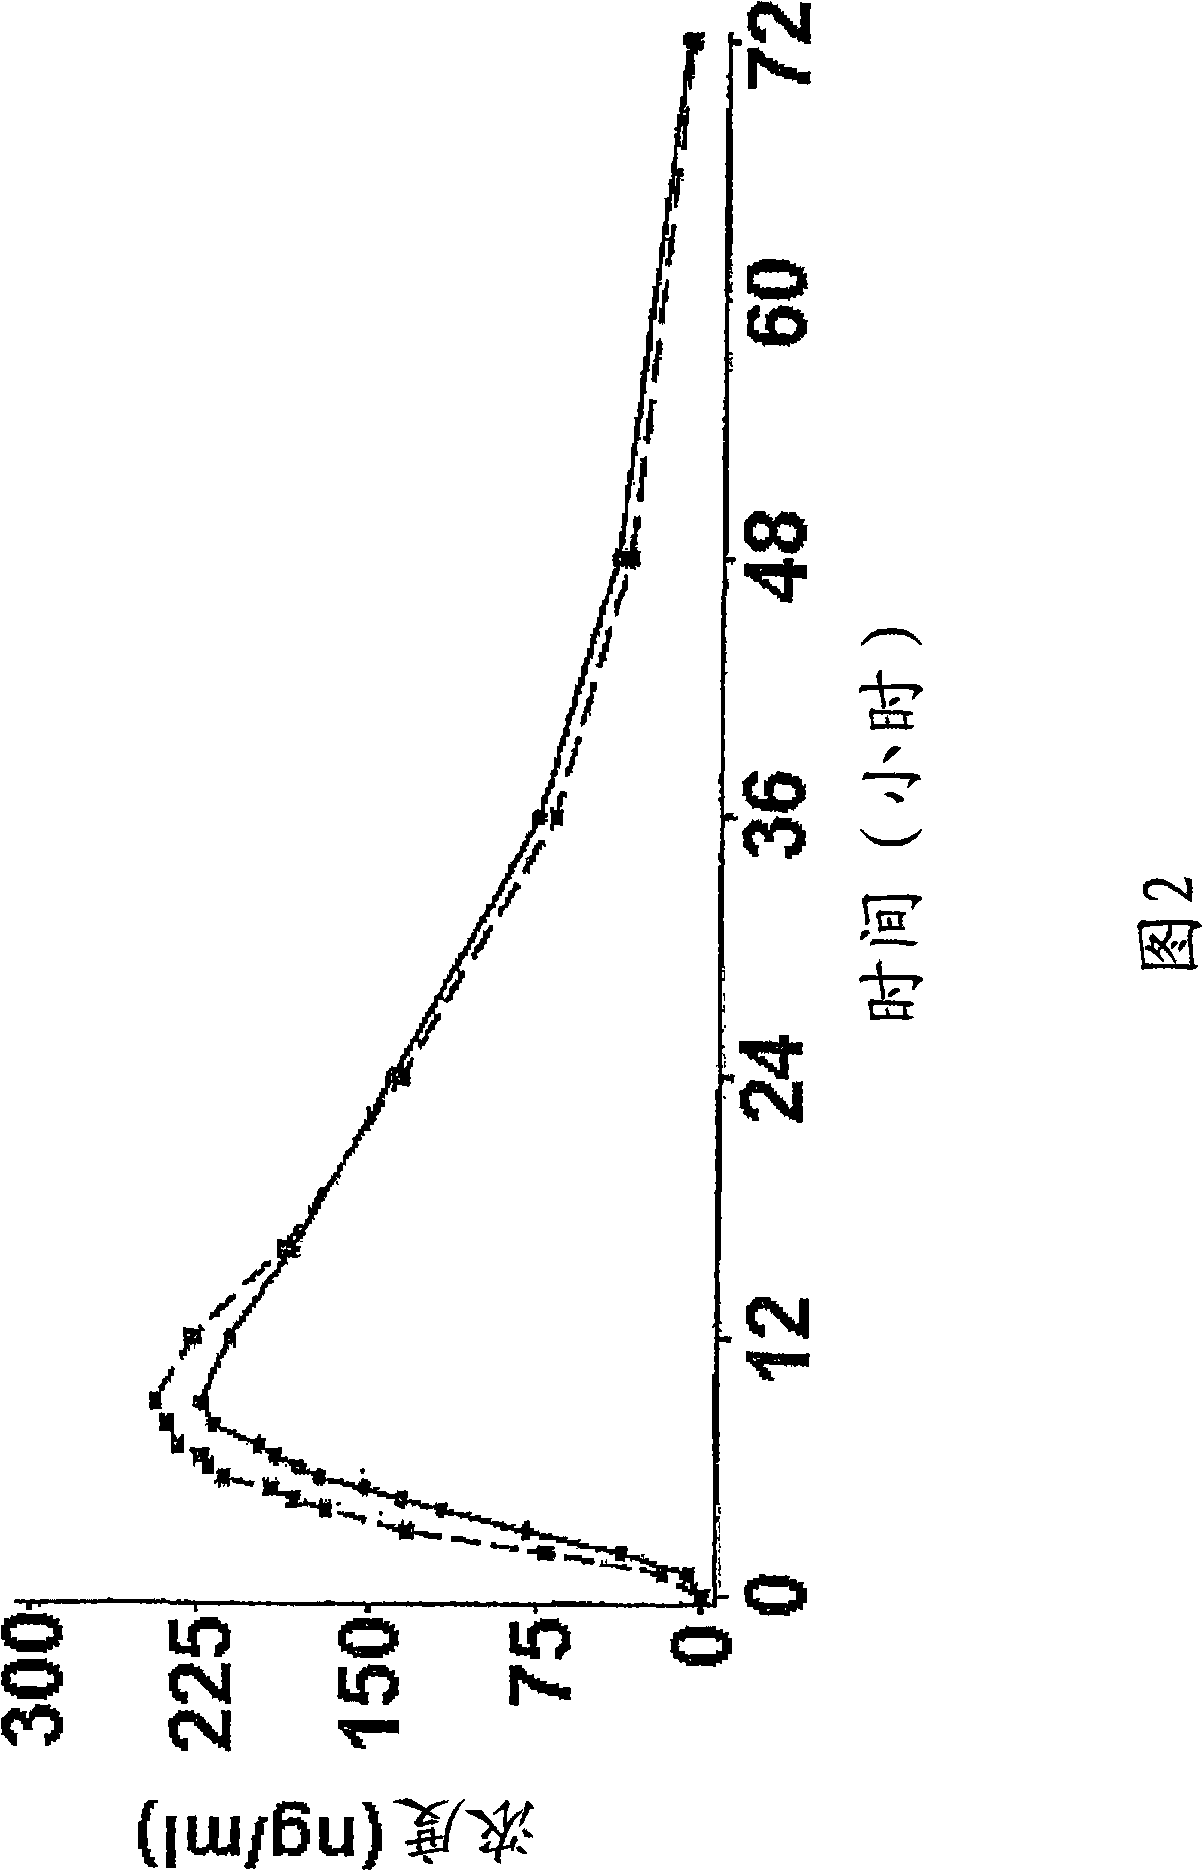 Controlled release pharmaceutical composition of venlafaxine hydrochloride, and process for preparation thereof